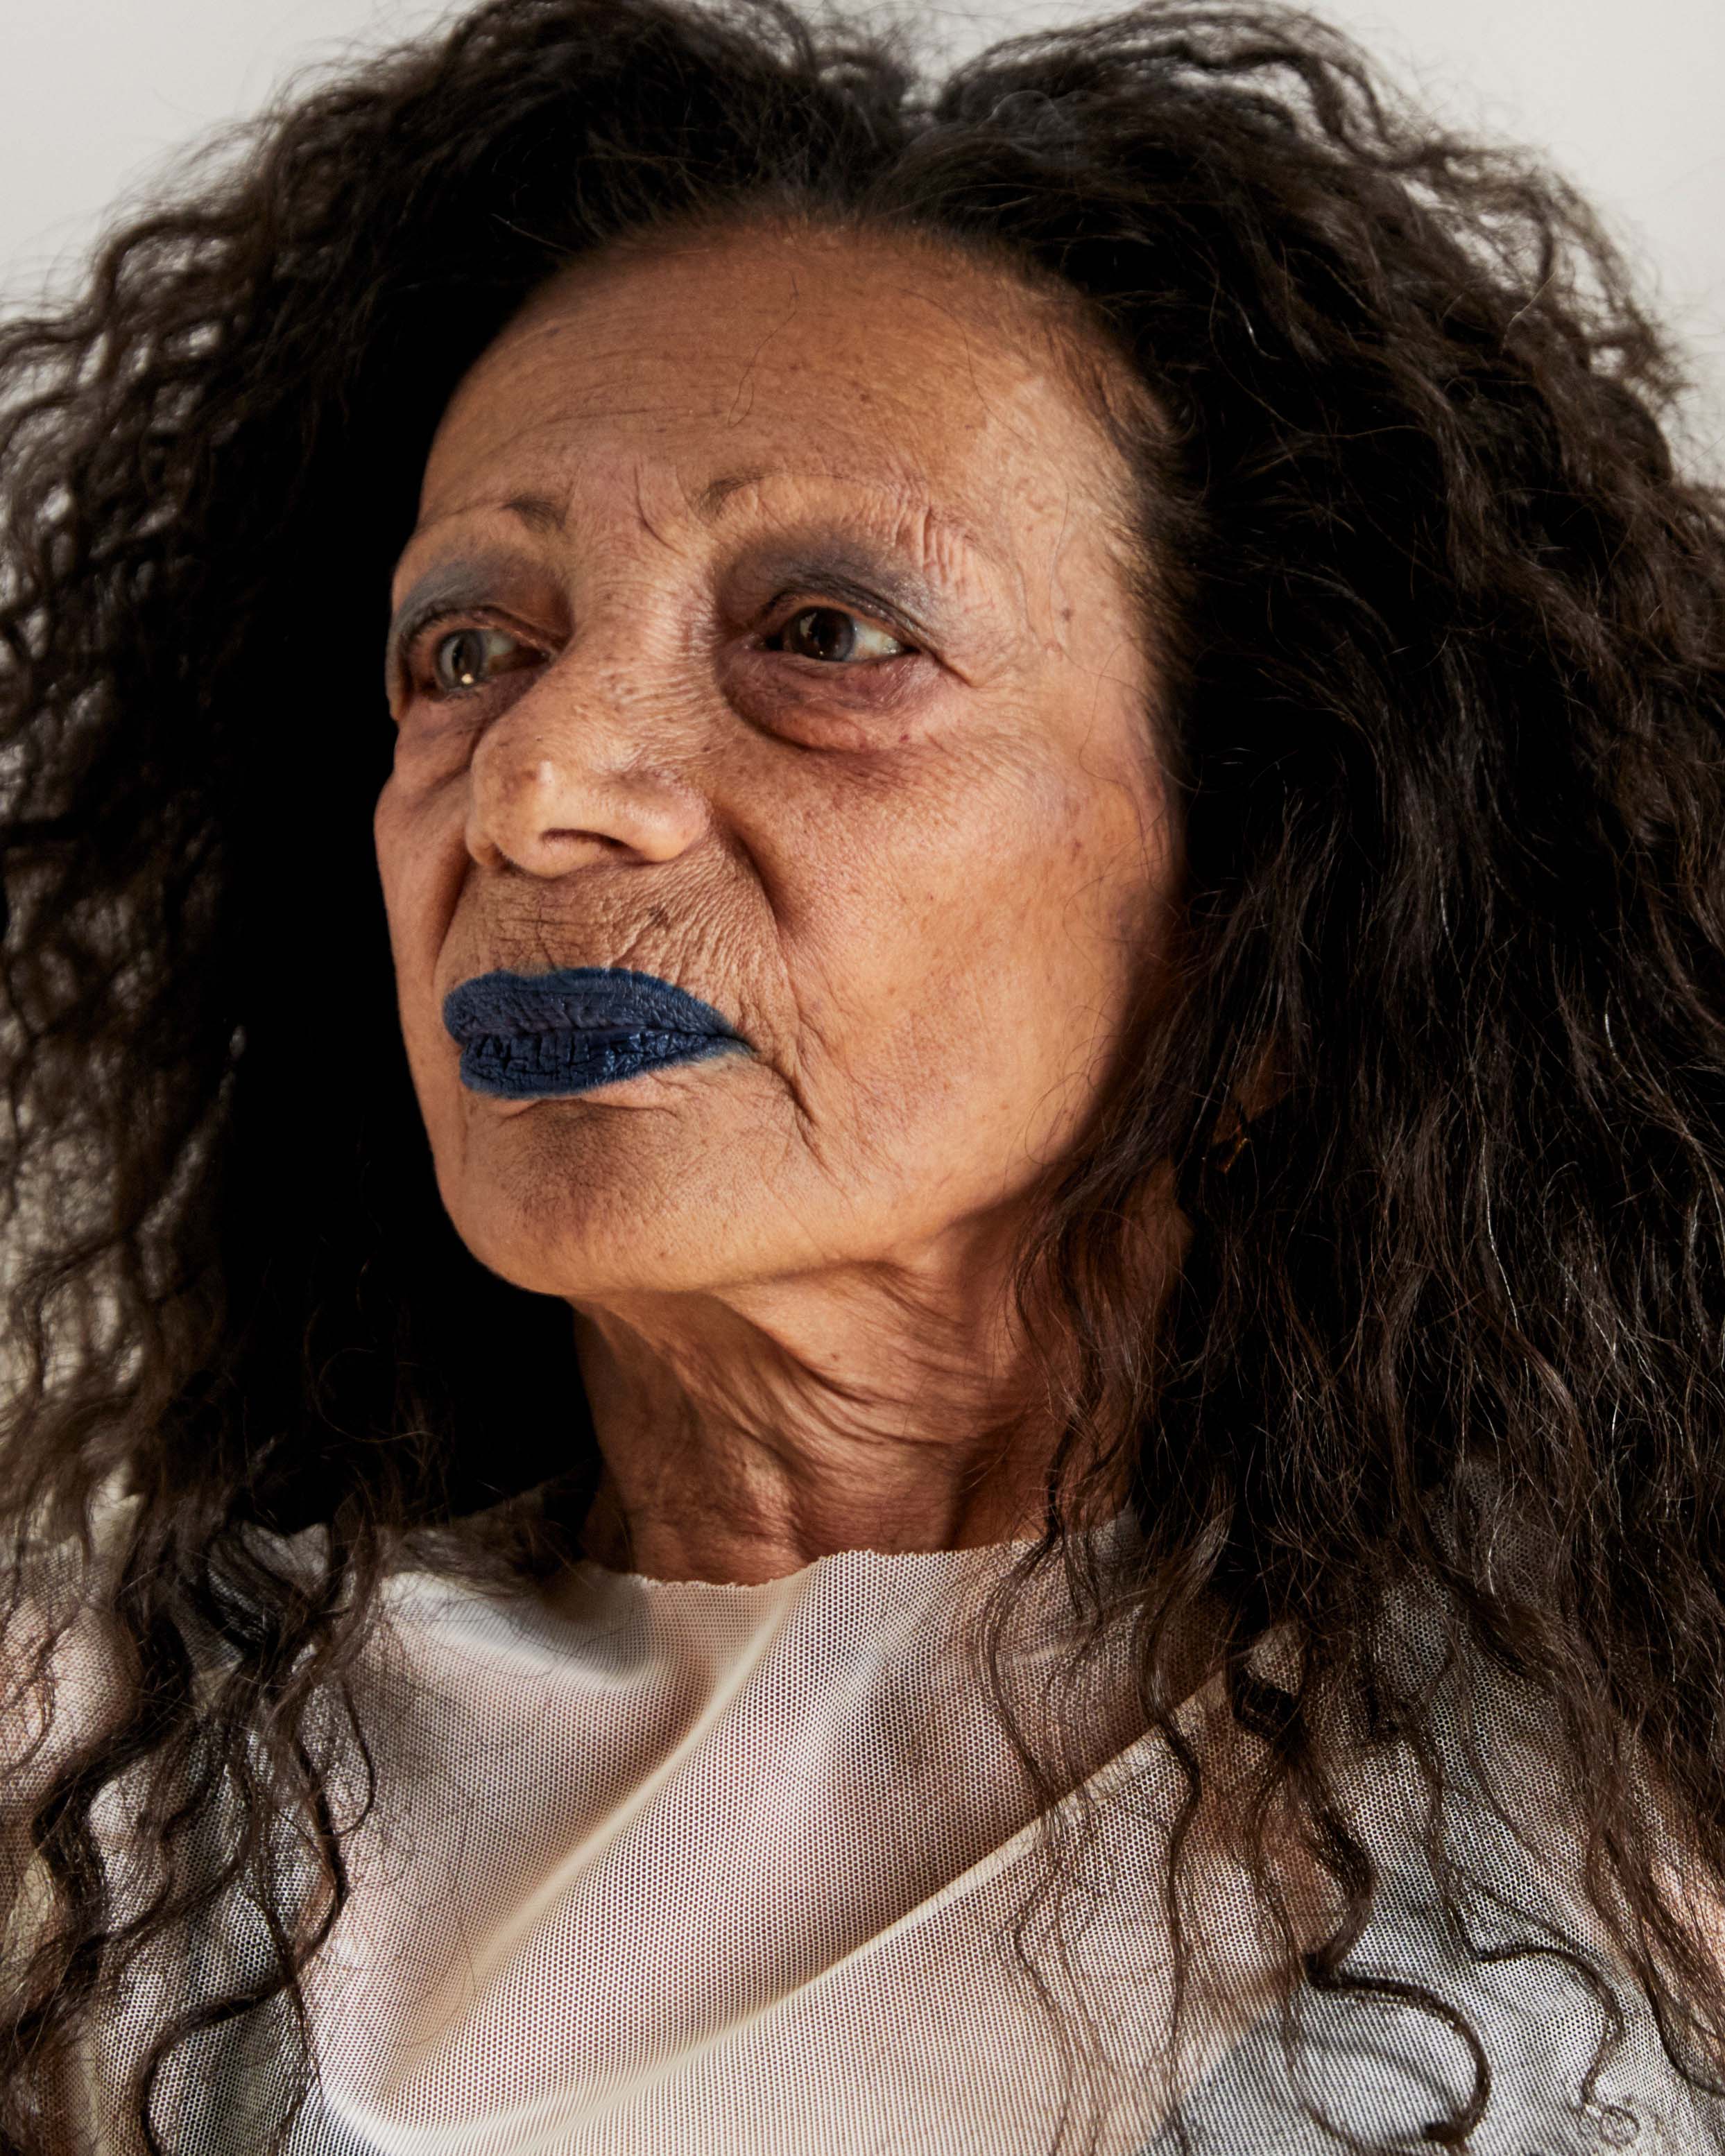 How do we create a more age-inclusive beauty industry? | Wallpaper